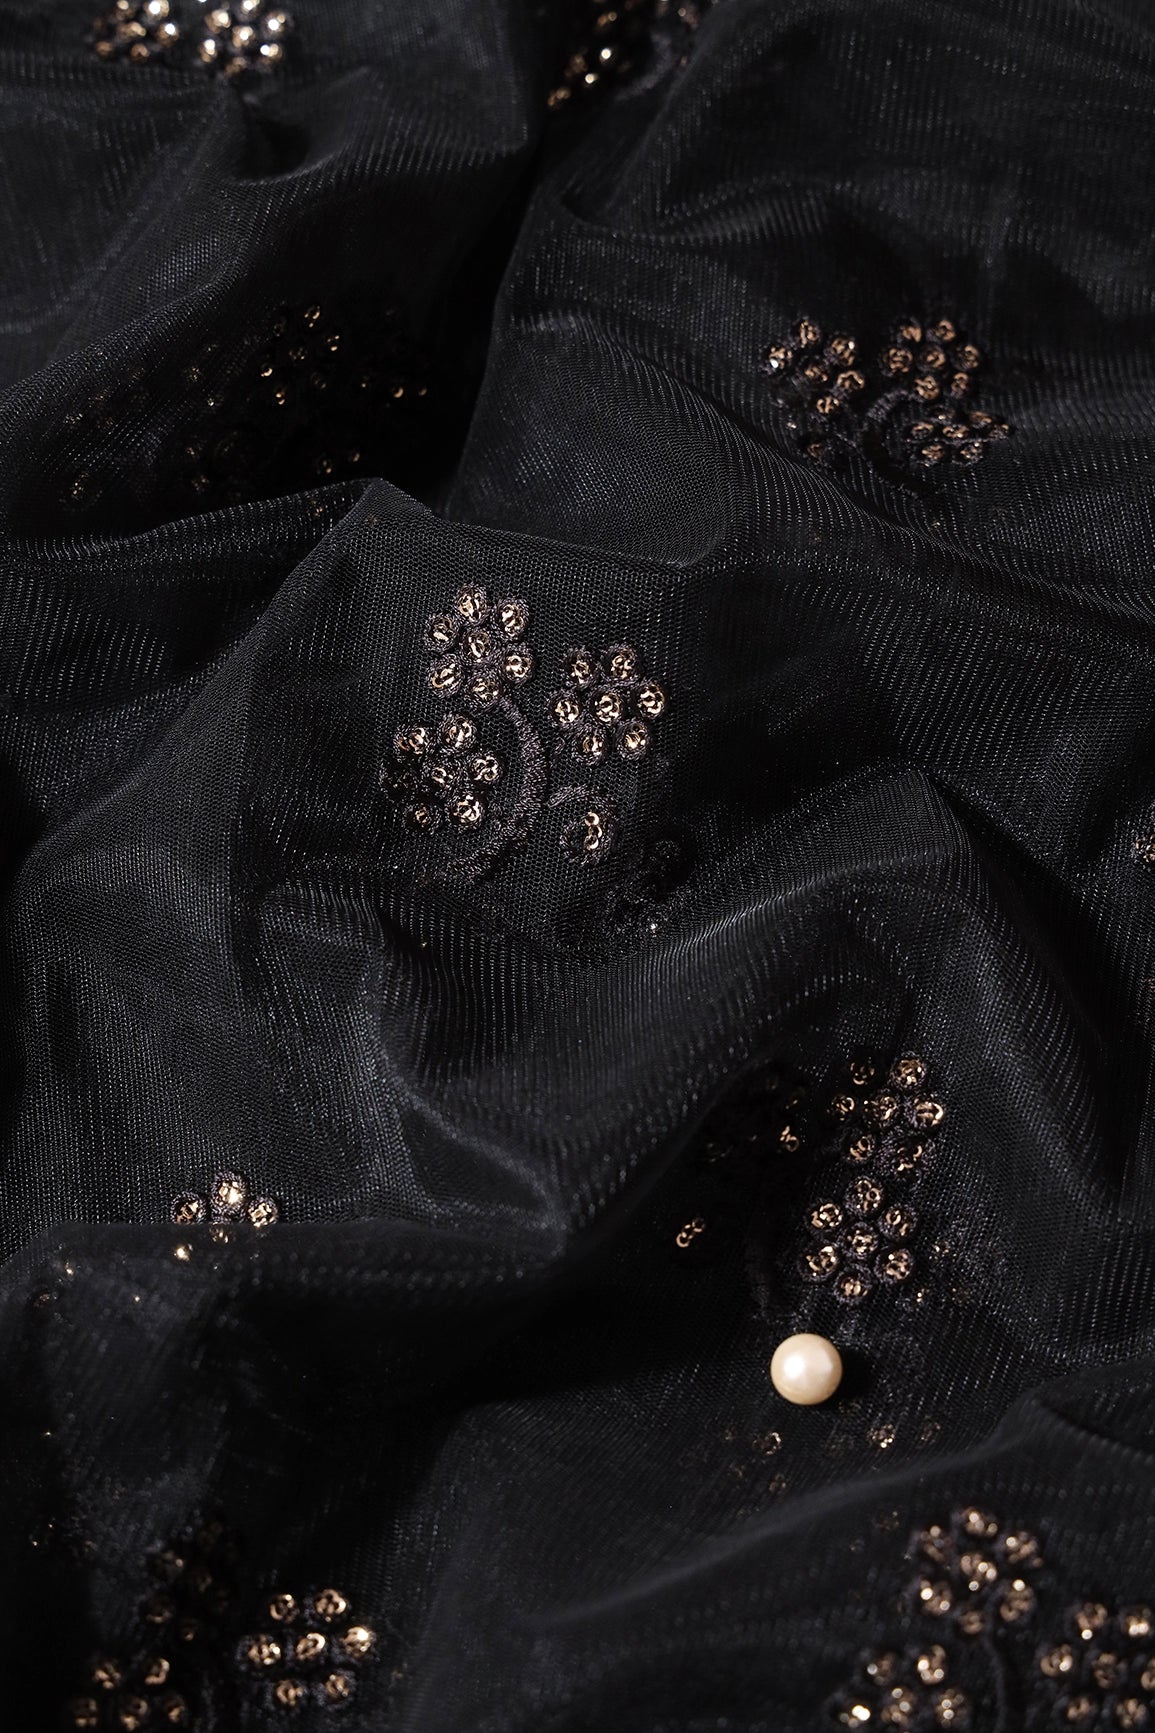 2.50 Meter Cut Piece Of Black Thread With Gold Sequins Floral Embroidery On Black Soft Net Fabric